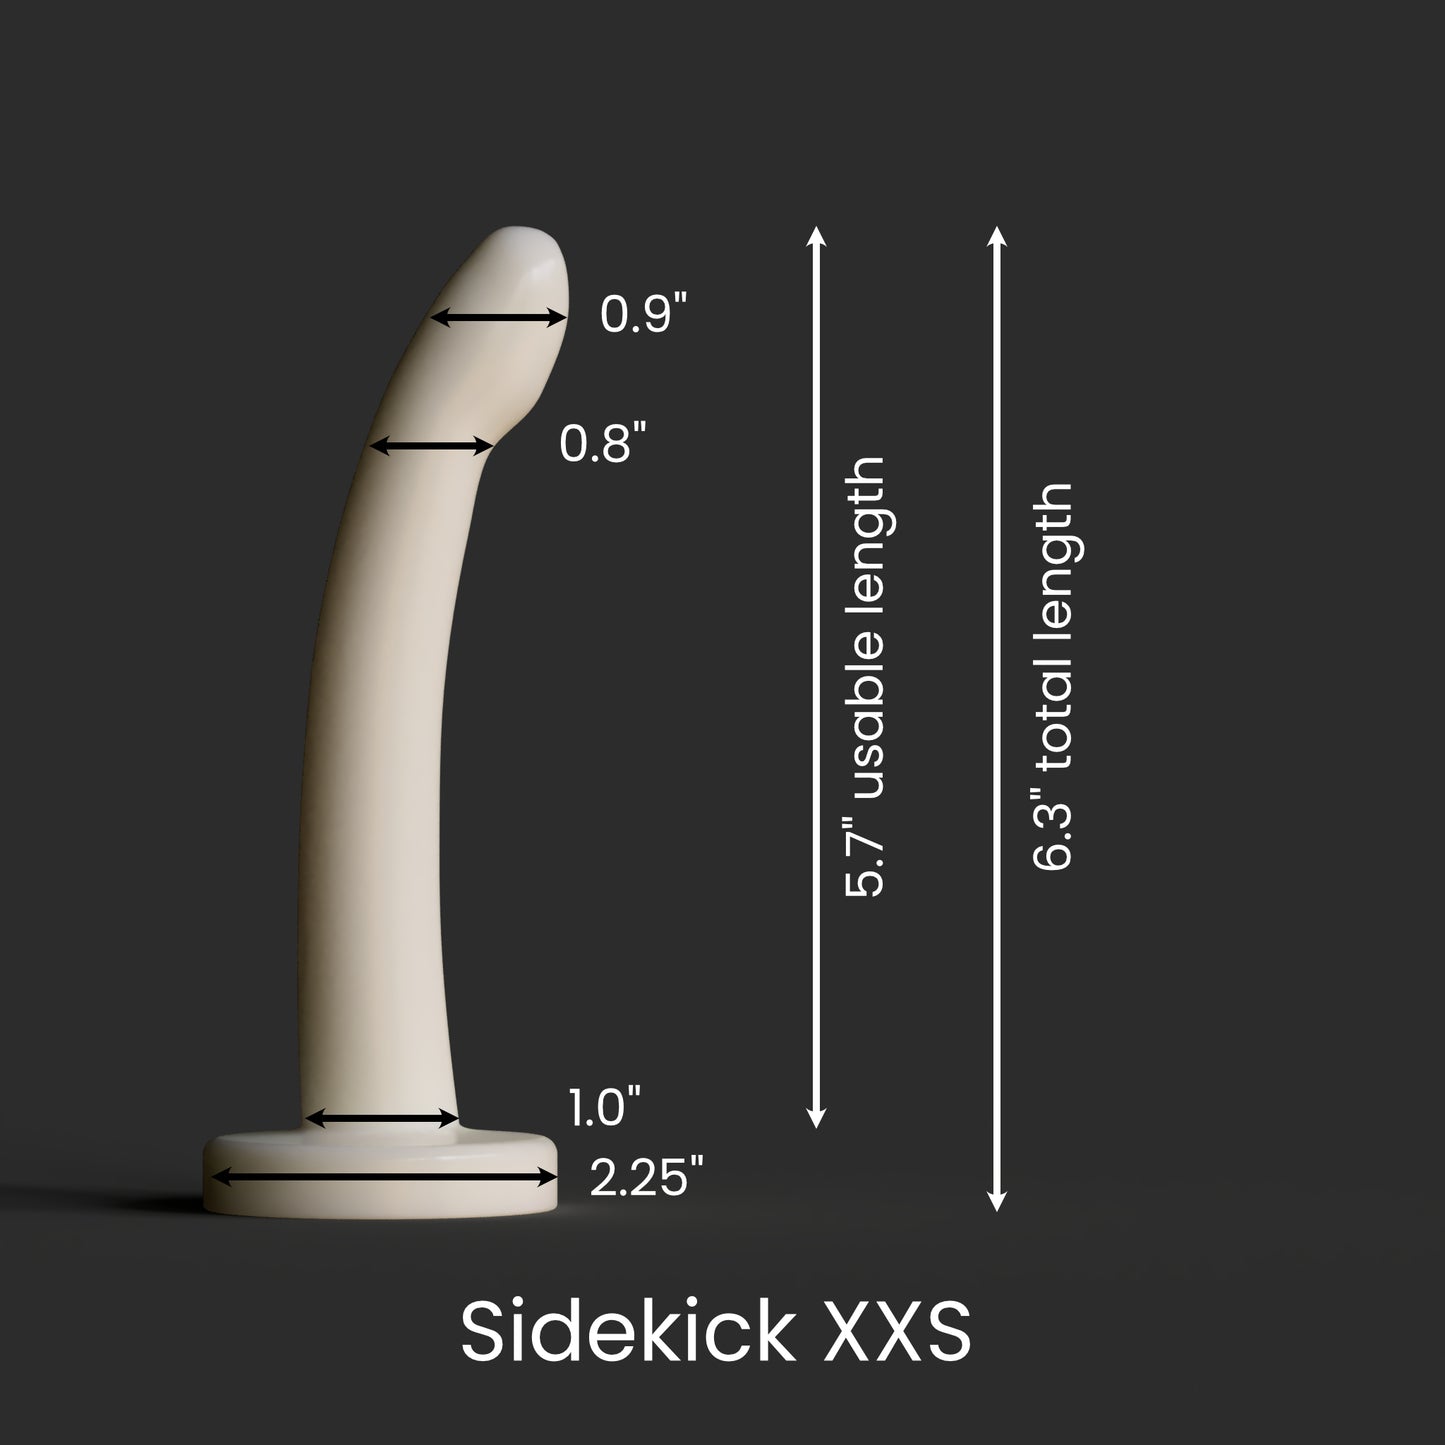  Diagram showing the dimensions of the Sidekick XXS as described in the product description.